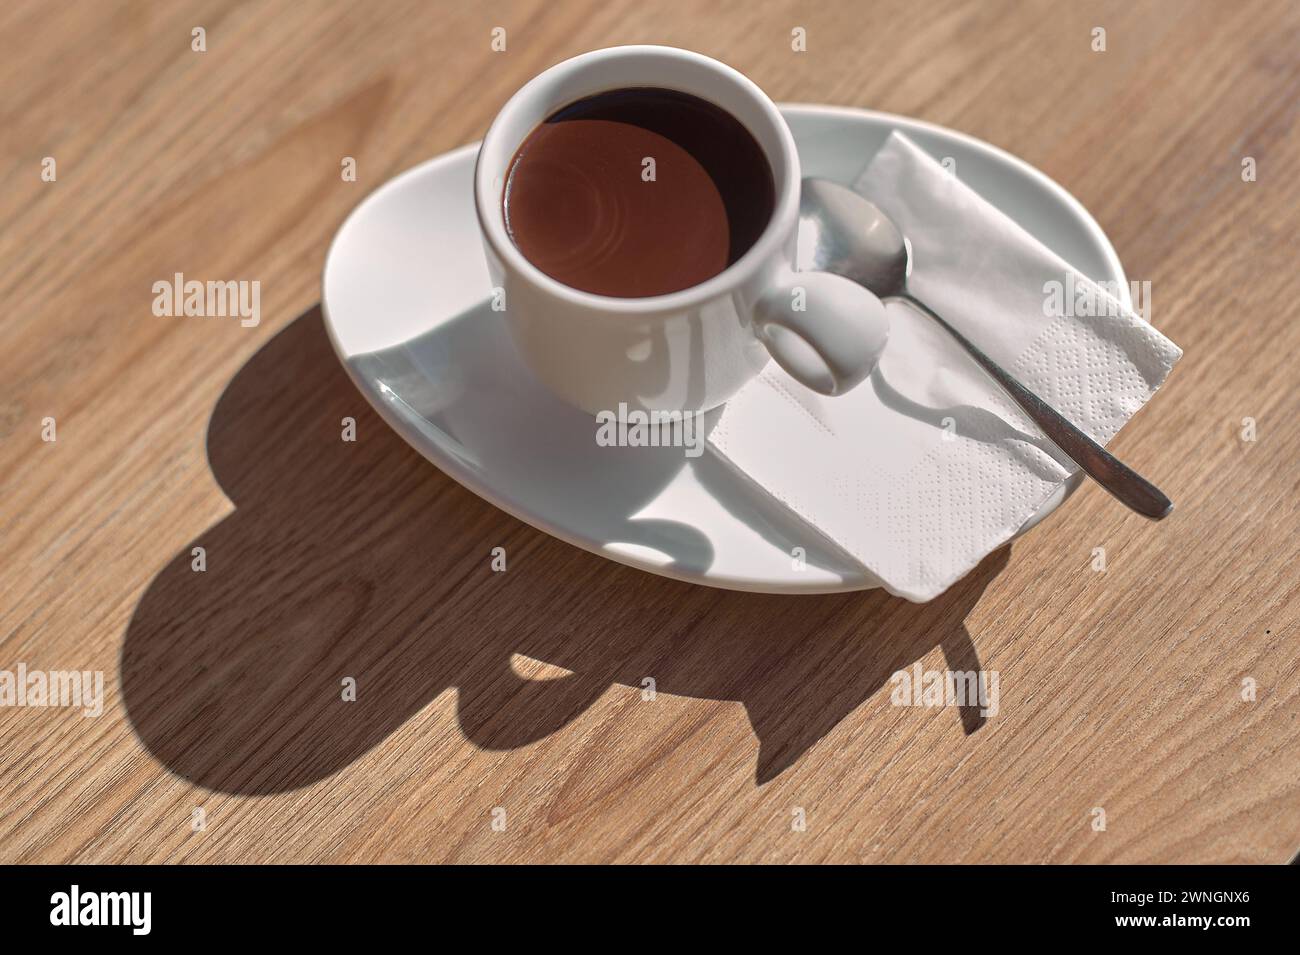 Cup of chocolate on a wooden table, illuminated by sunlight creating an artistic shadow. Stock Photo